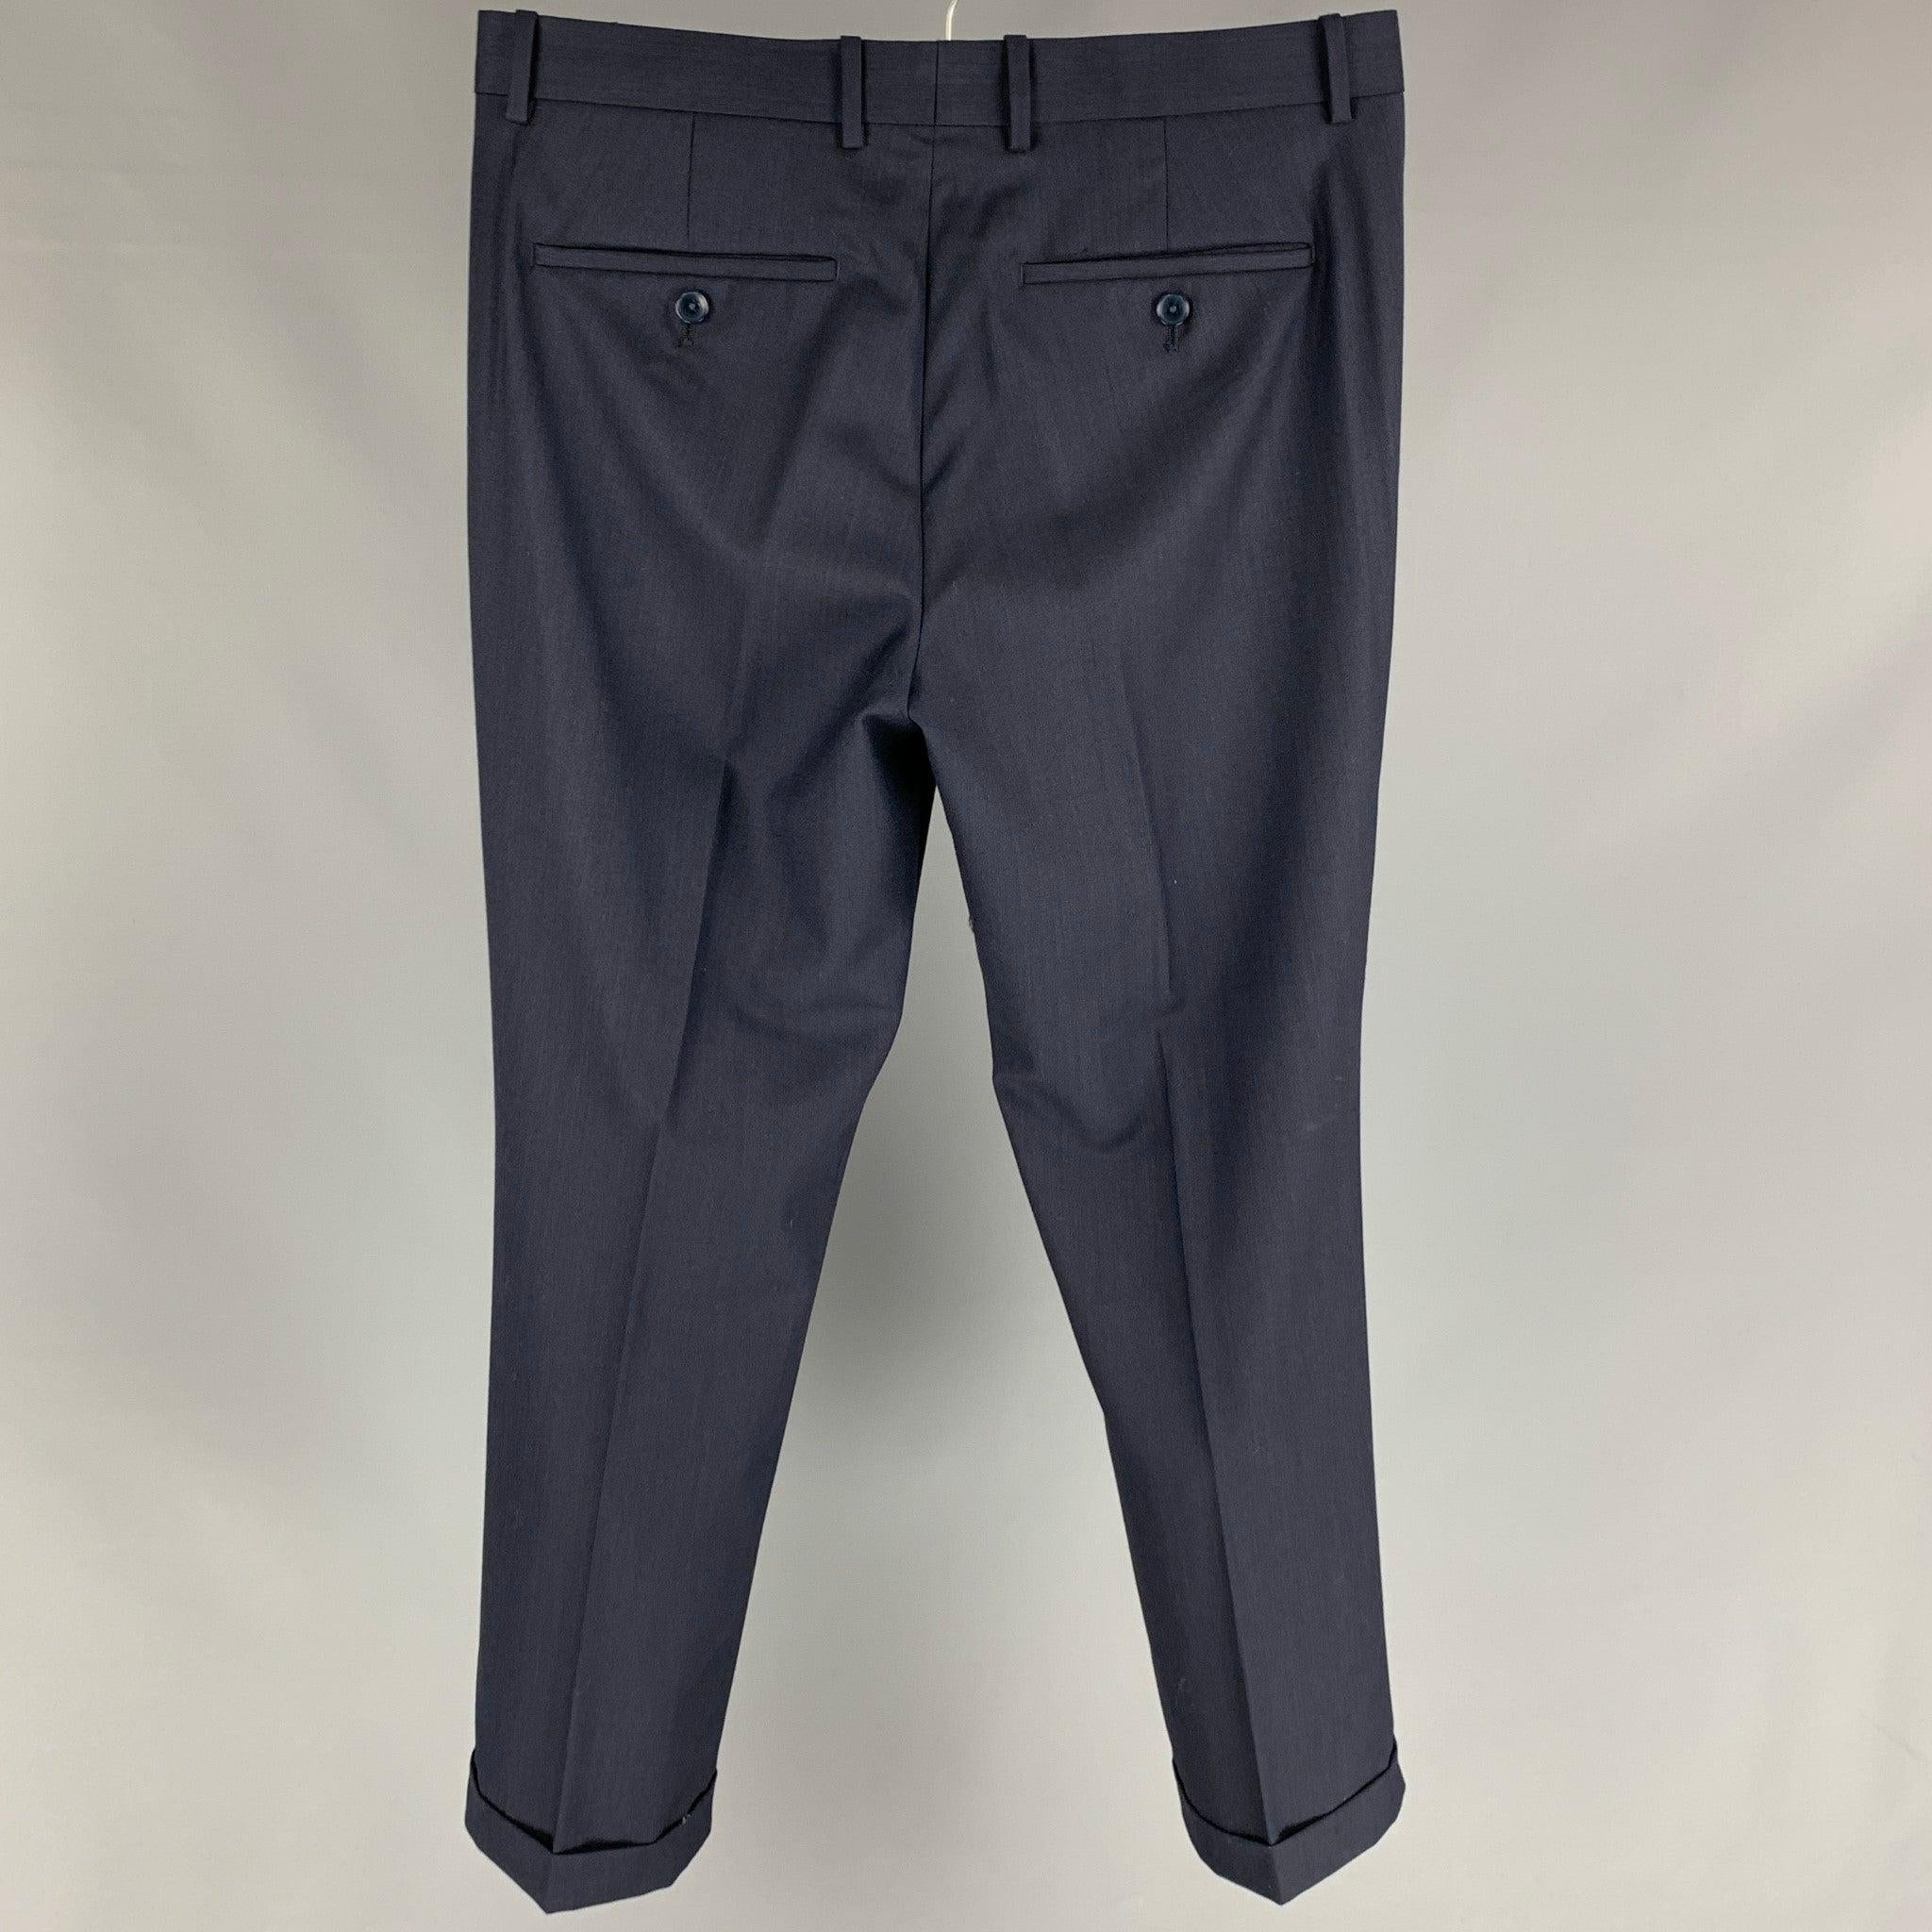 THEORY dress pants comes in a navy wool featuring flat front, cuffed legs, front tabs, and a zip fly closure.Very Good
Pre-Owned Condition. 

Marked:   31 

Measurements: 
  Waist: 31 inches  Rise: 10 inches  Inseam: 28 inches 
  
  
 
Reference: